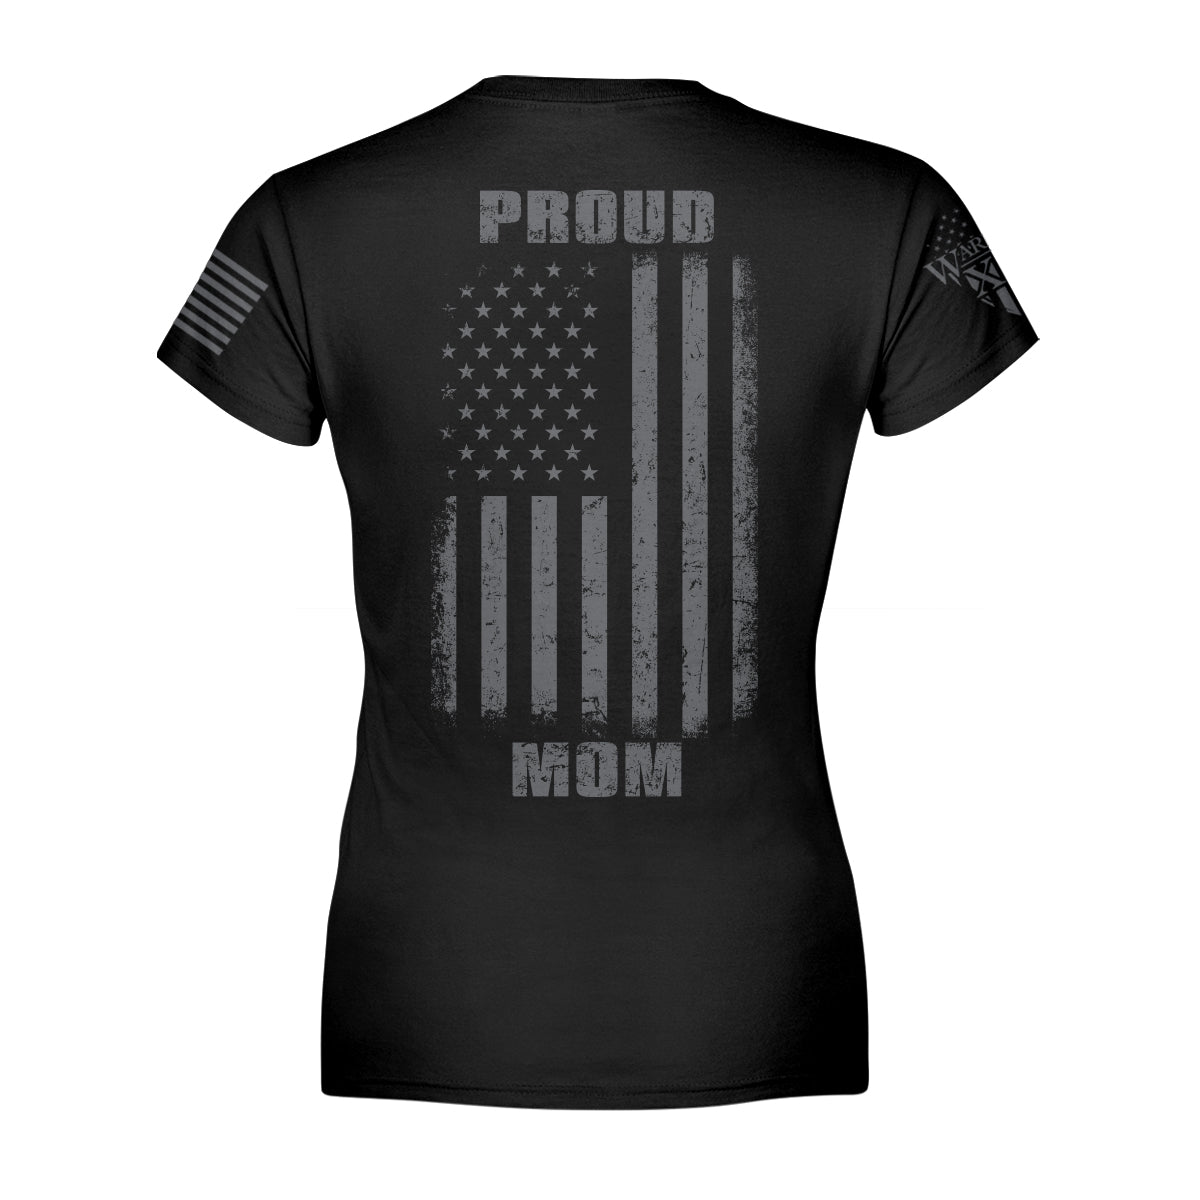 The back of "Proud Mom" featuring the main design of, Proud mom.